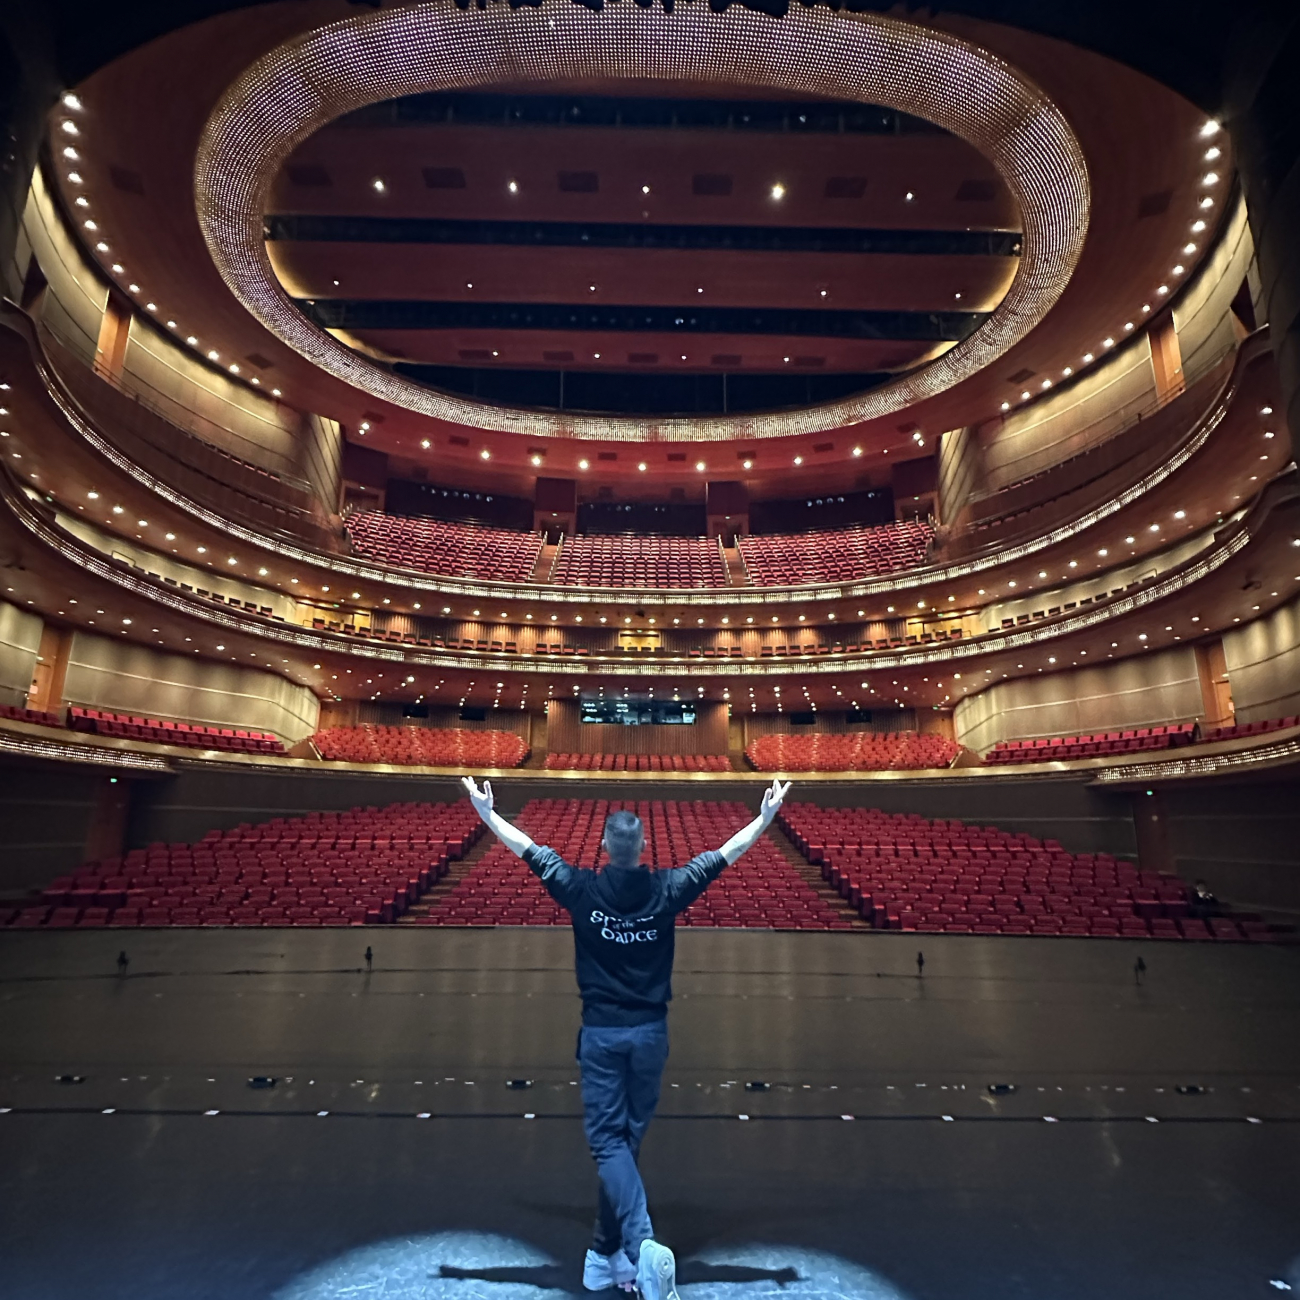 Joe, Weston College's performing arts lecturer, in Beijing, China on stage in empty theatre